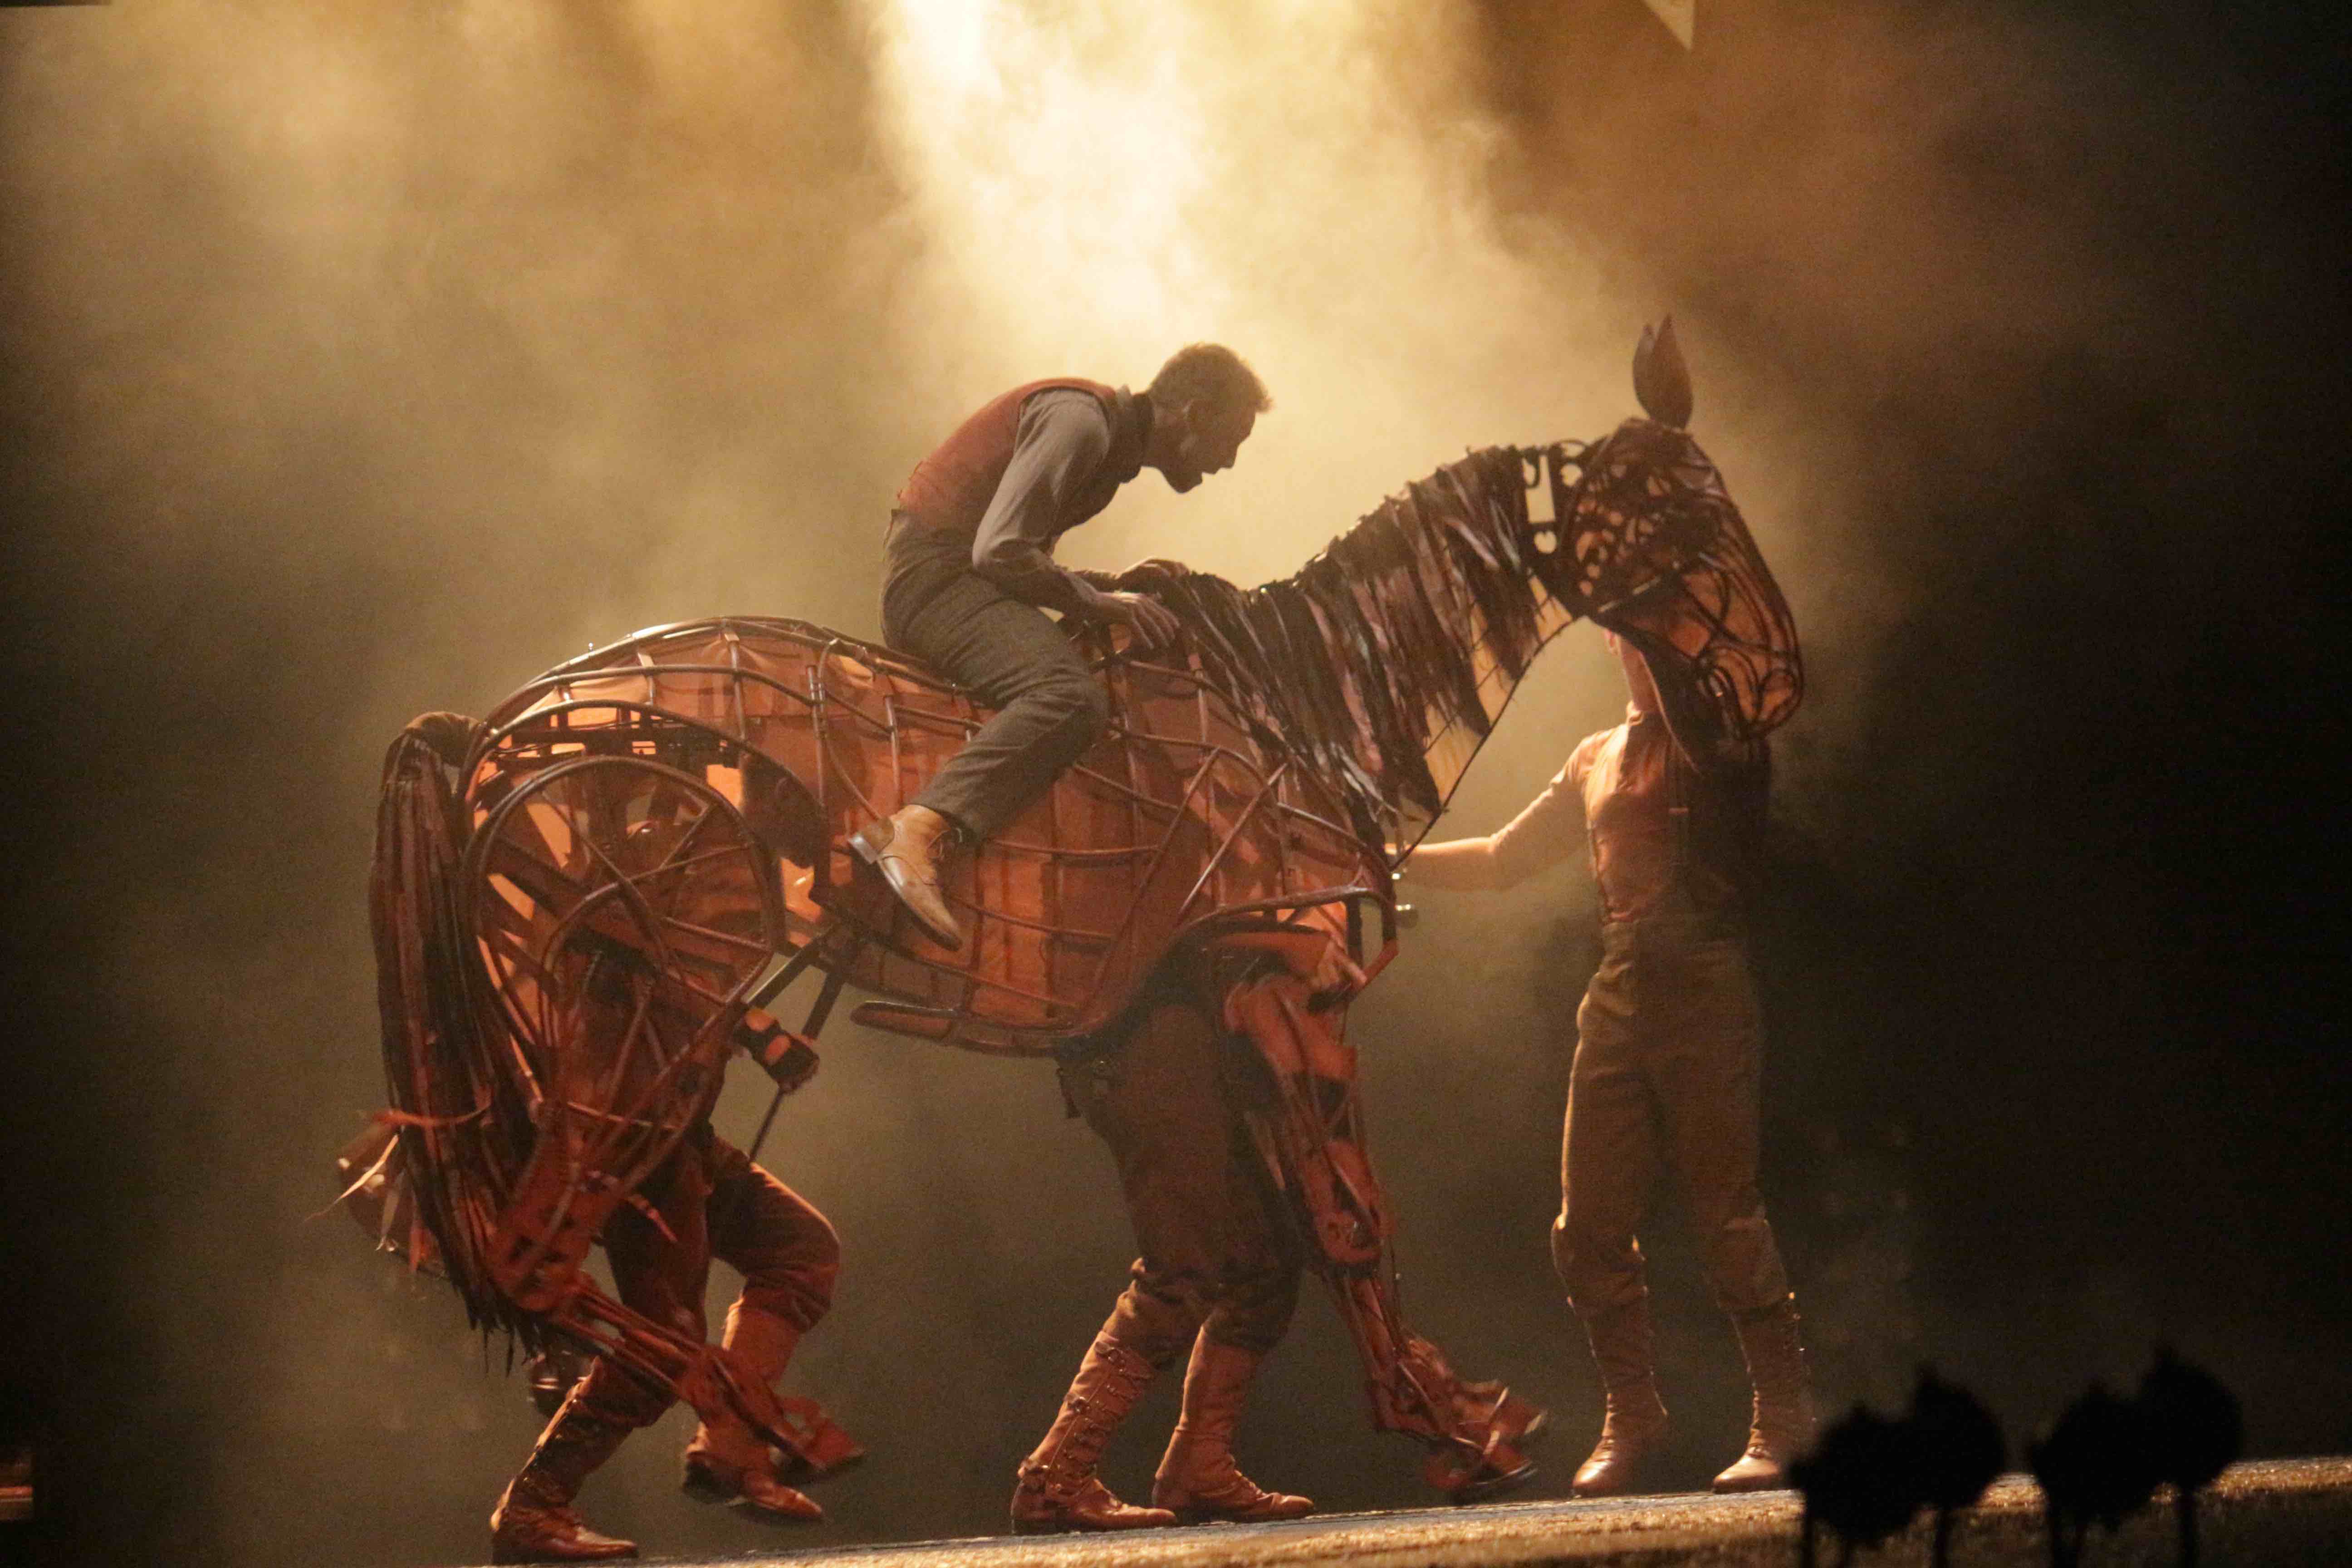 National Theatre of Great Britain perform a scene from the Tony Award-winning play War Horse. Photo by Vicky Wong.